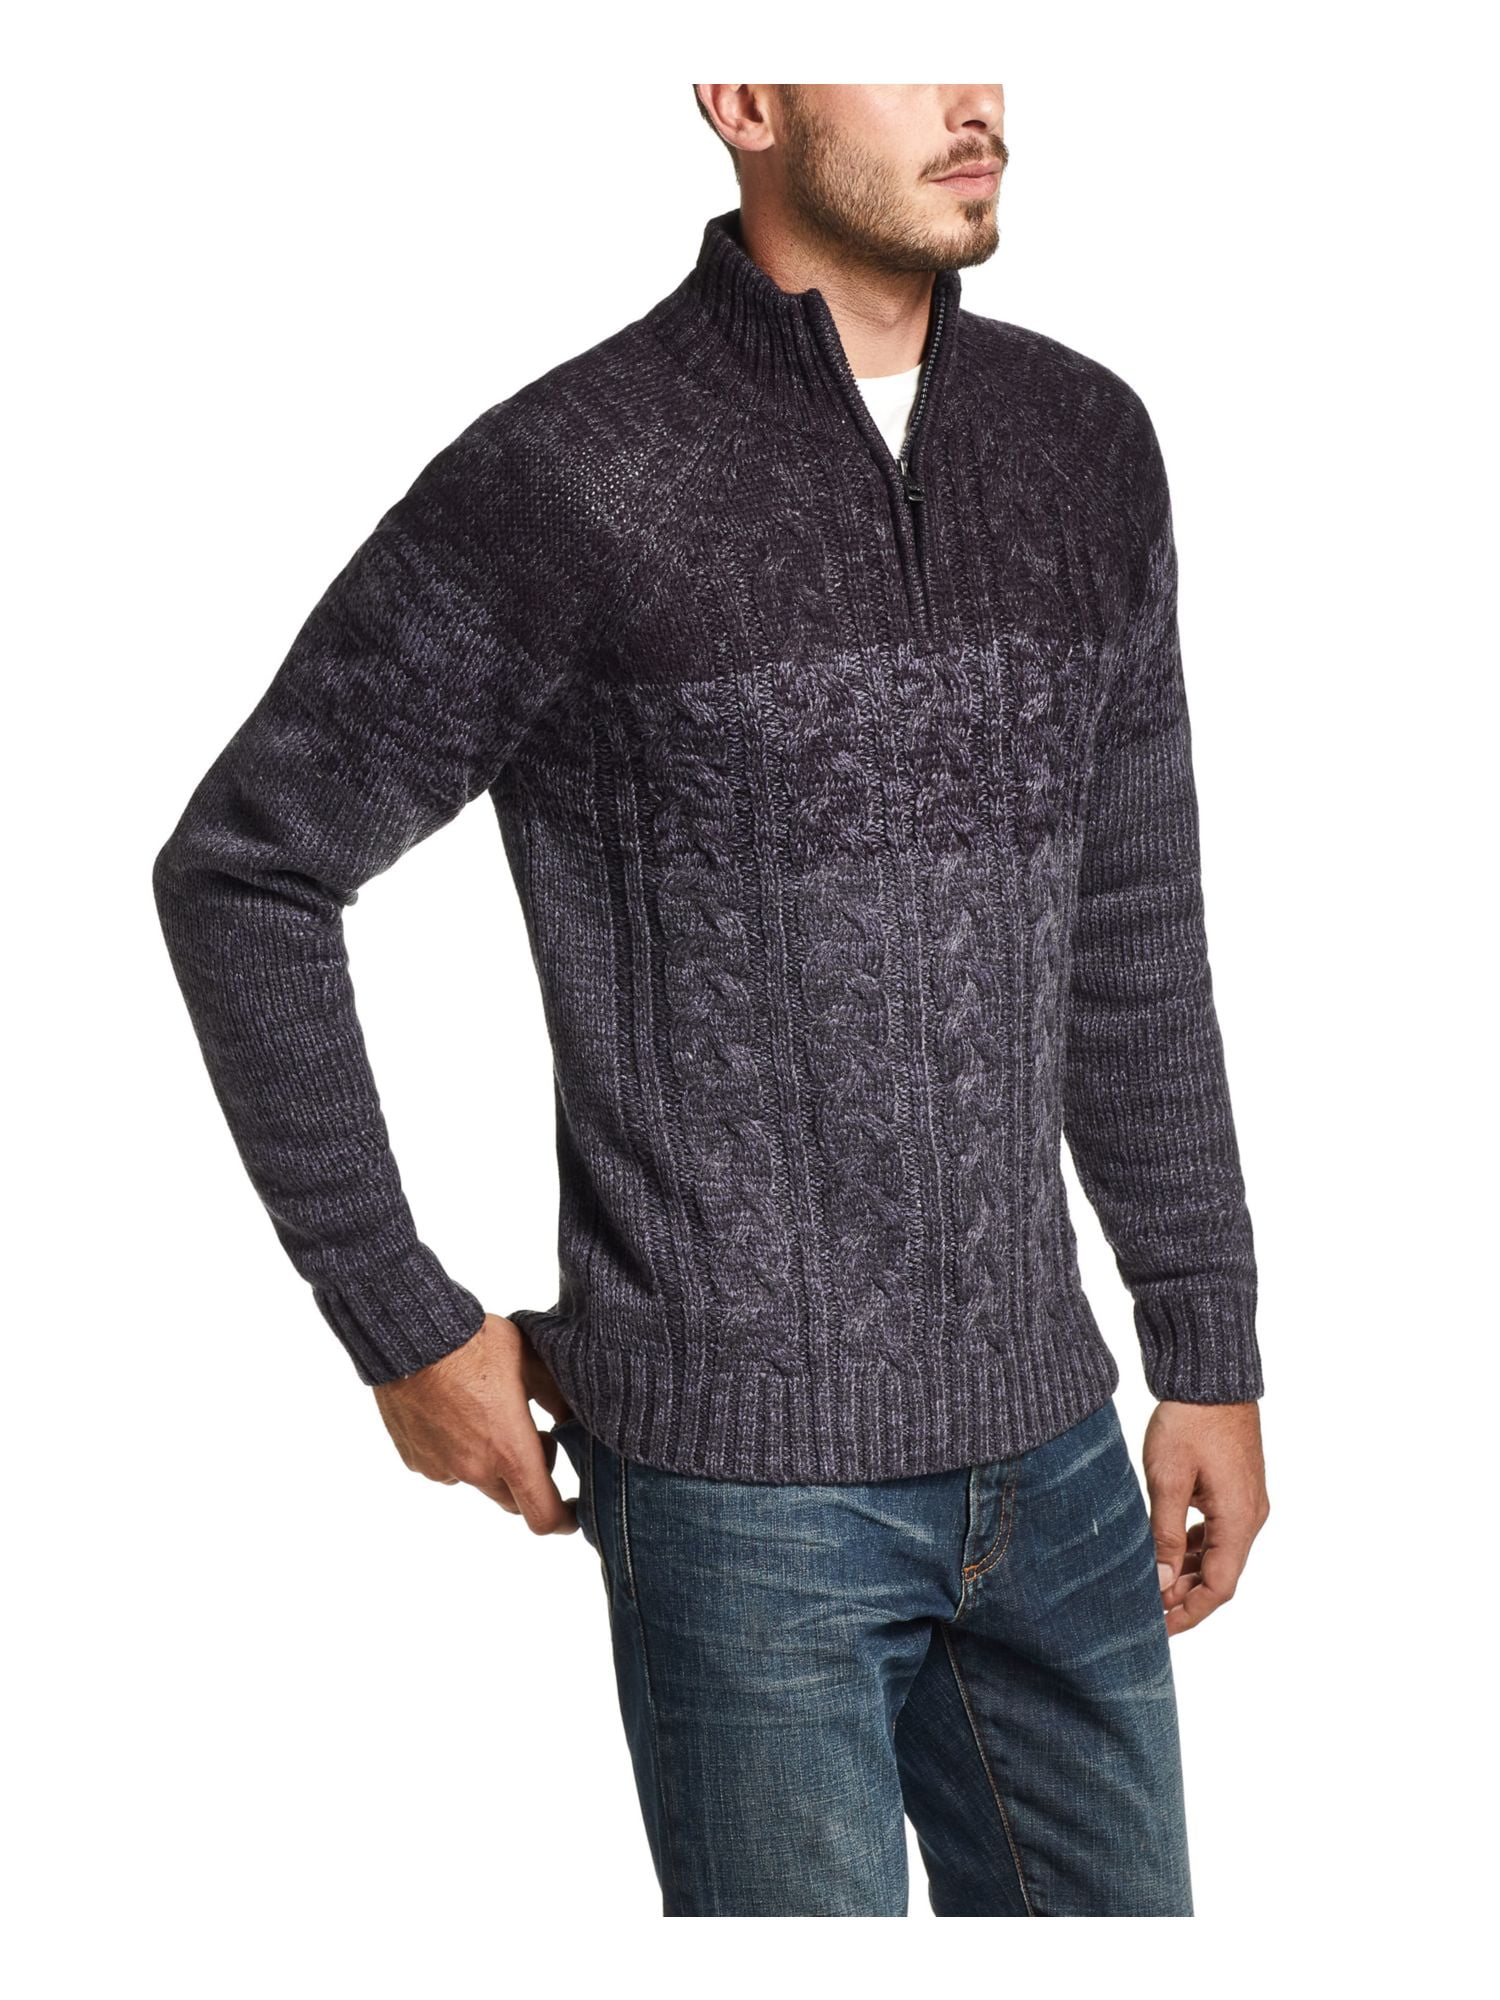 mens knitted jumper acrylic pullover winter top sweater by Kensington Eastside